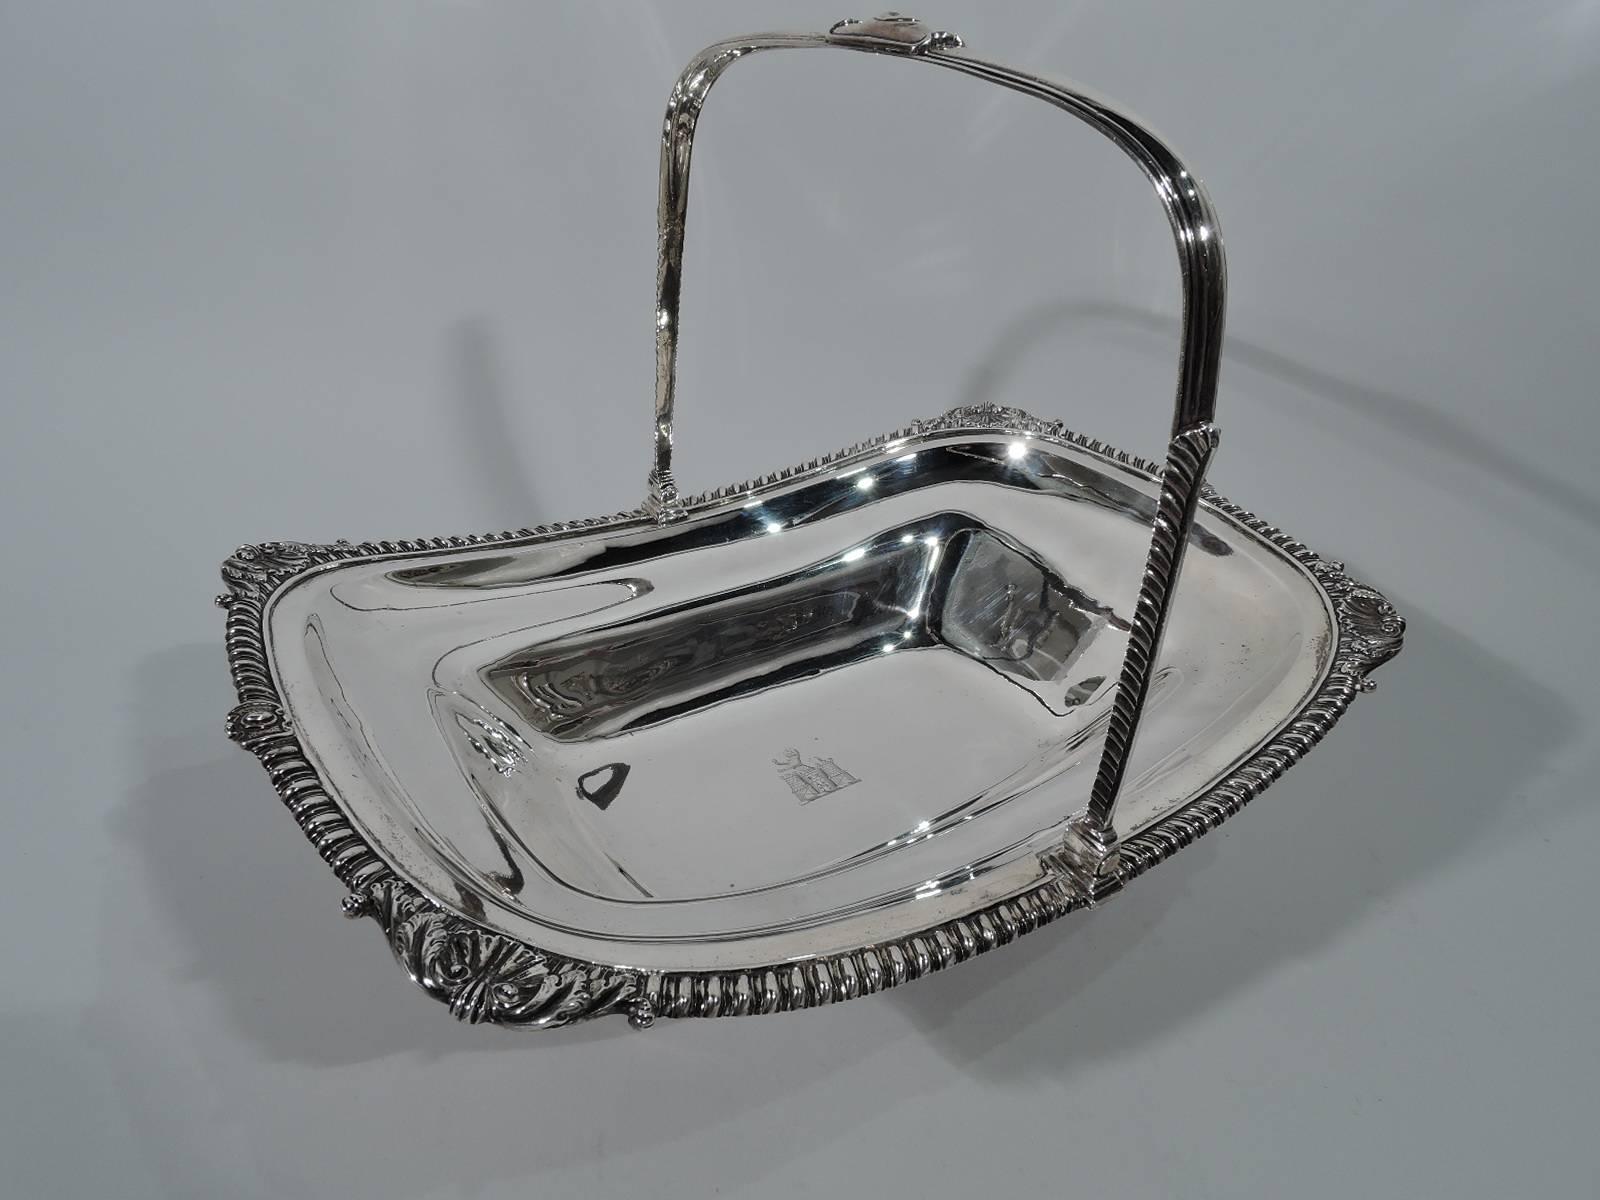 George III sterling silver basket. Made by Thomas Robins in London in 1808. Tapering rectilinear bowl with swing u-form handle and raised foot. Gadrooned rim with shells and leaves. Handle sides leaf-capped. Armorial with lion rampant and turreted